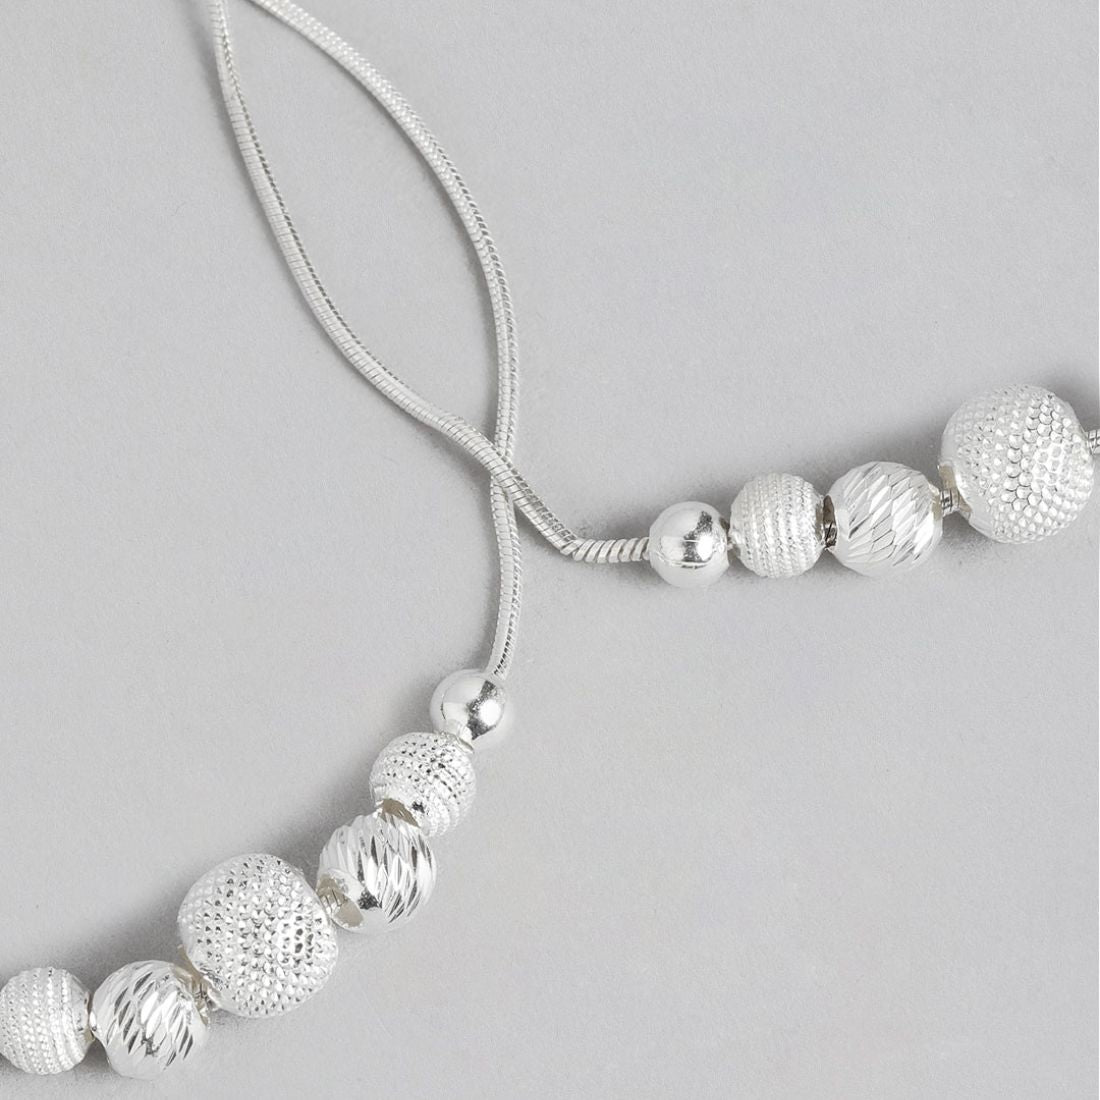 Lustrous Glow Rhodium Plated 925 Sterling Silver Anklet with Silver Balls